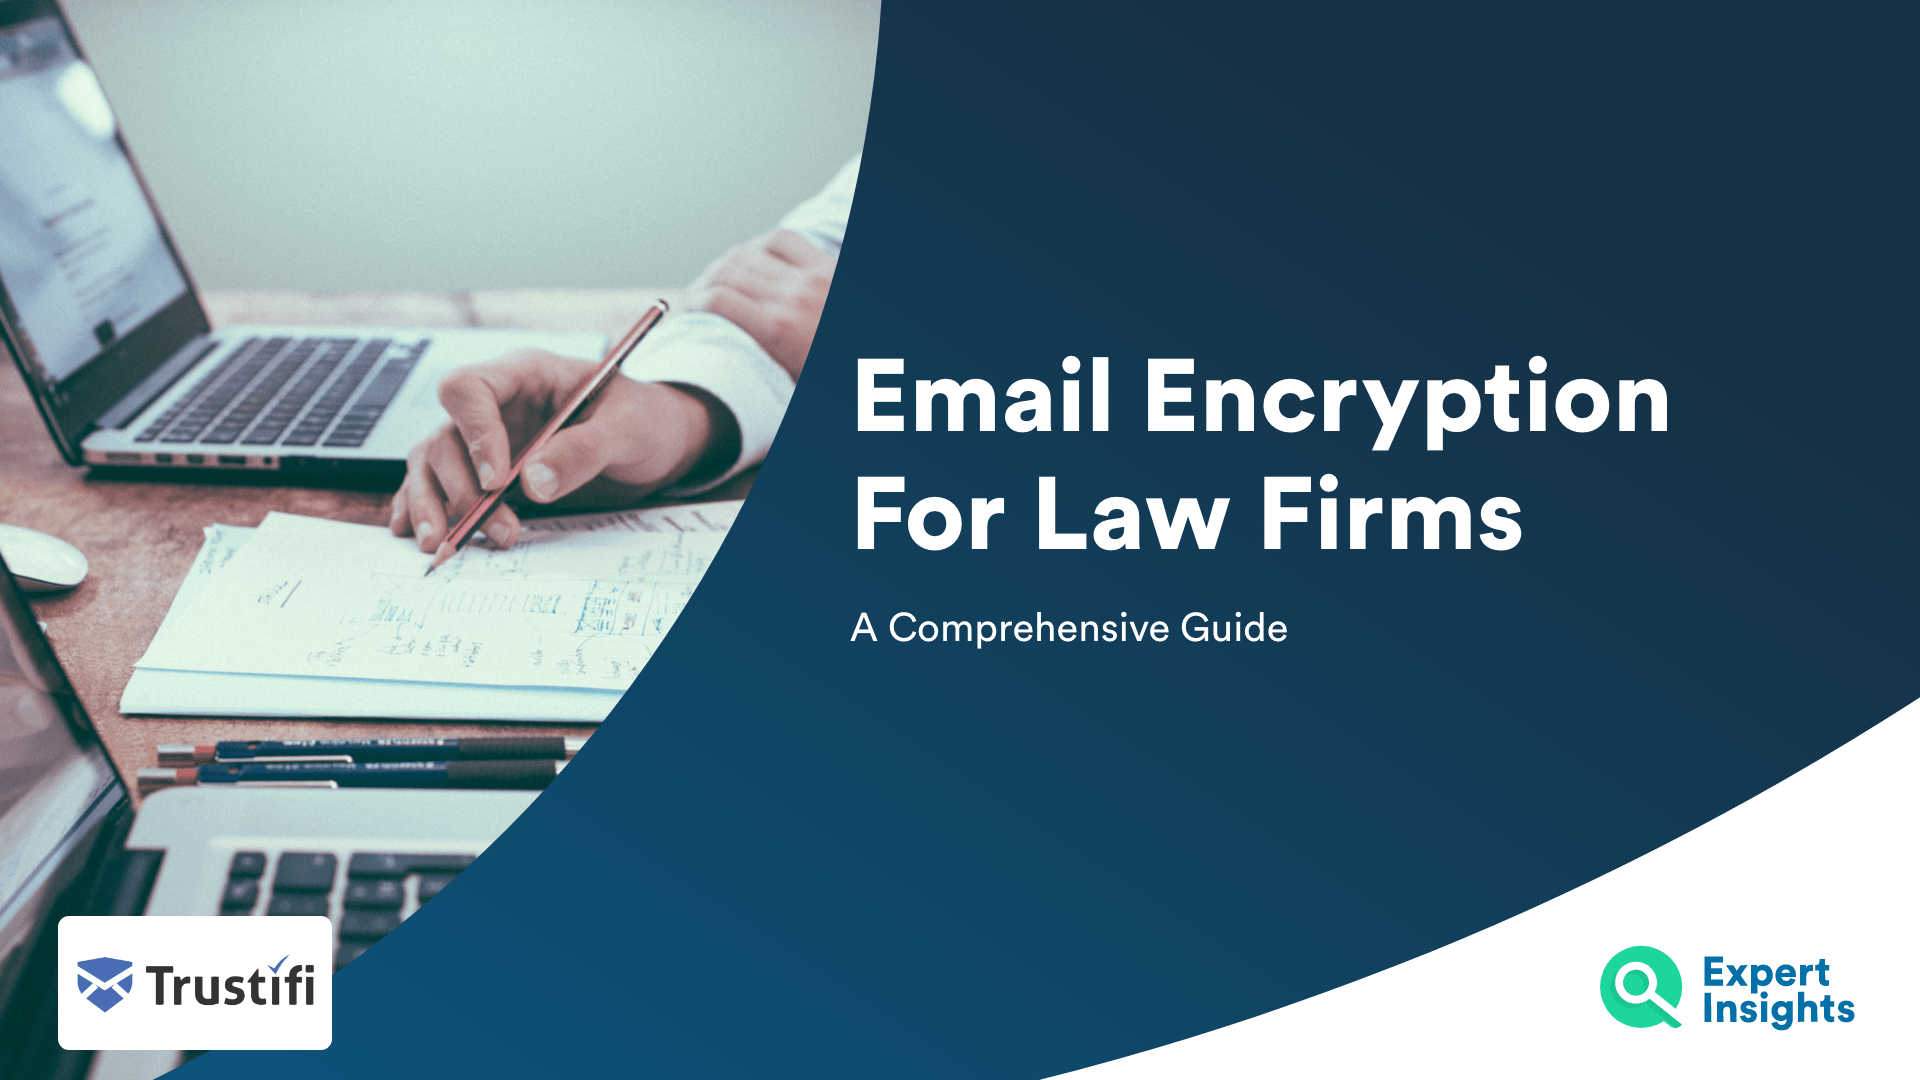 Email Encryption For Law Firms: A Comprehensive Guide - Expert Insights